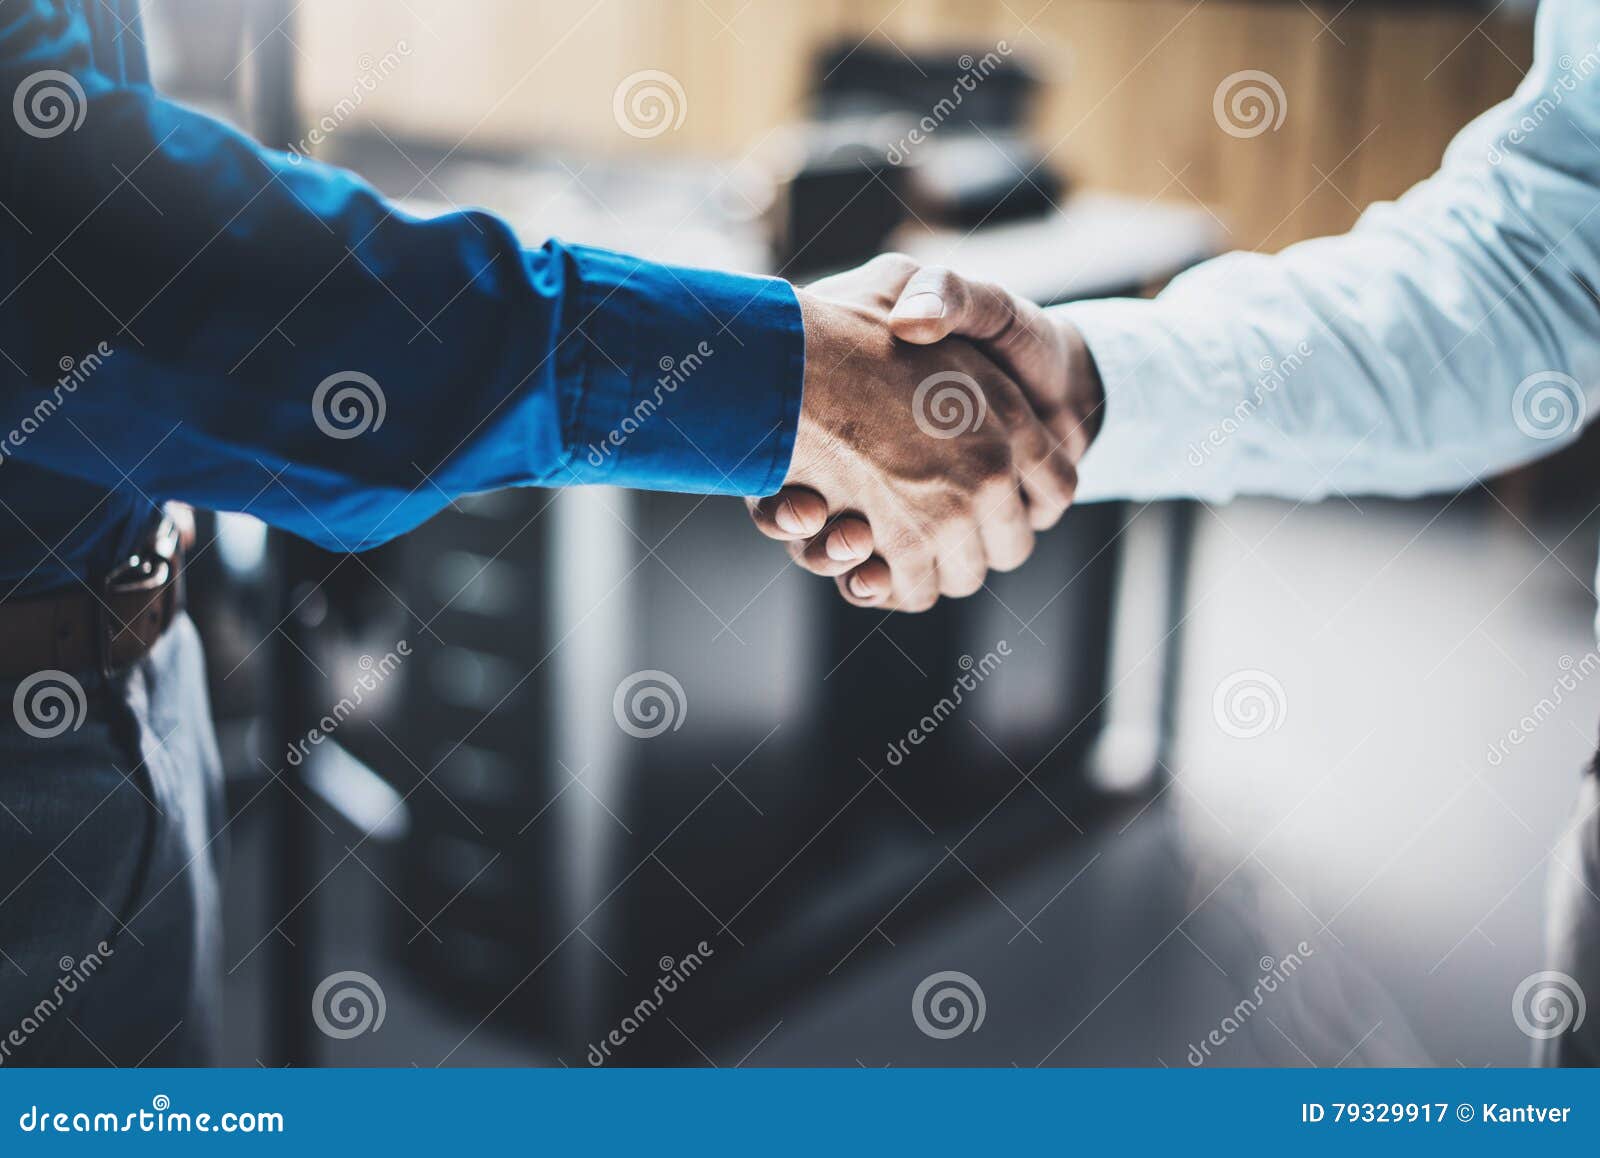 business partnership handshake concept.closeup photo of two businessmans handshaking process.successful deal after great